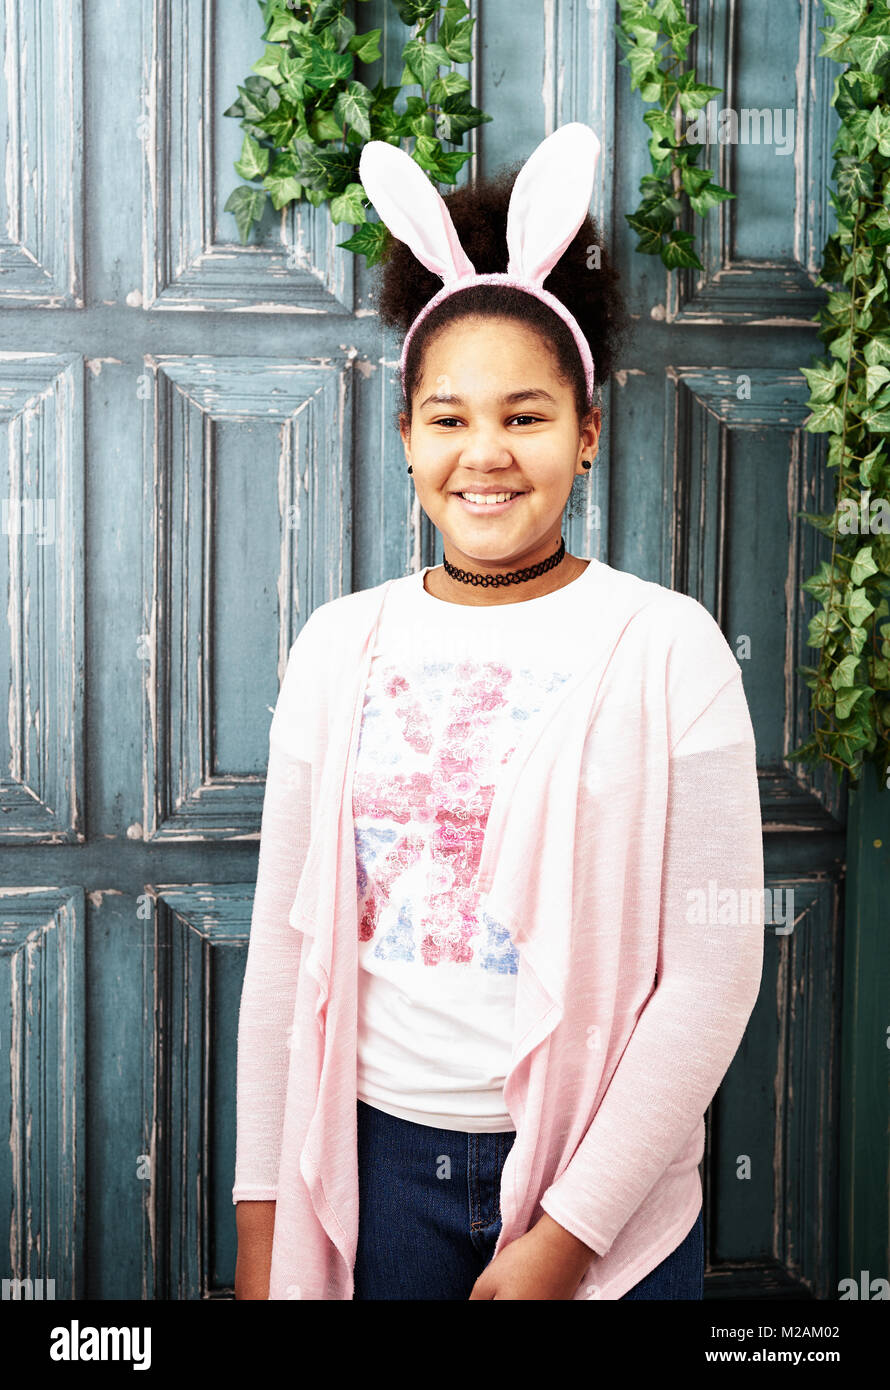 Portrait of african girl with pink bunny ears Stock Photo